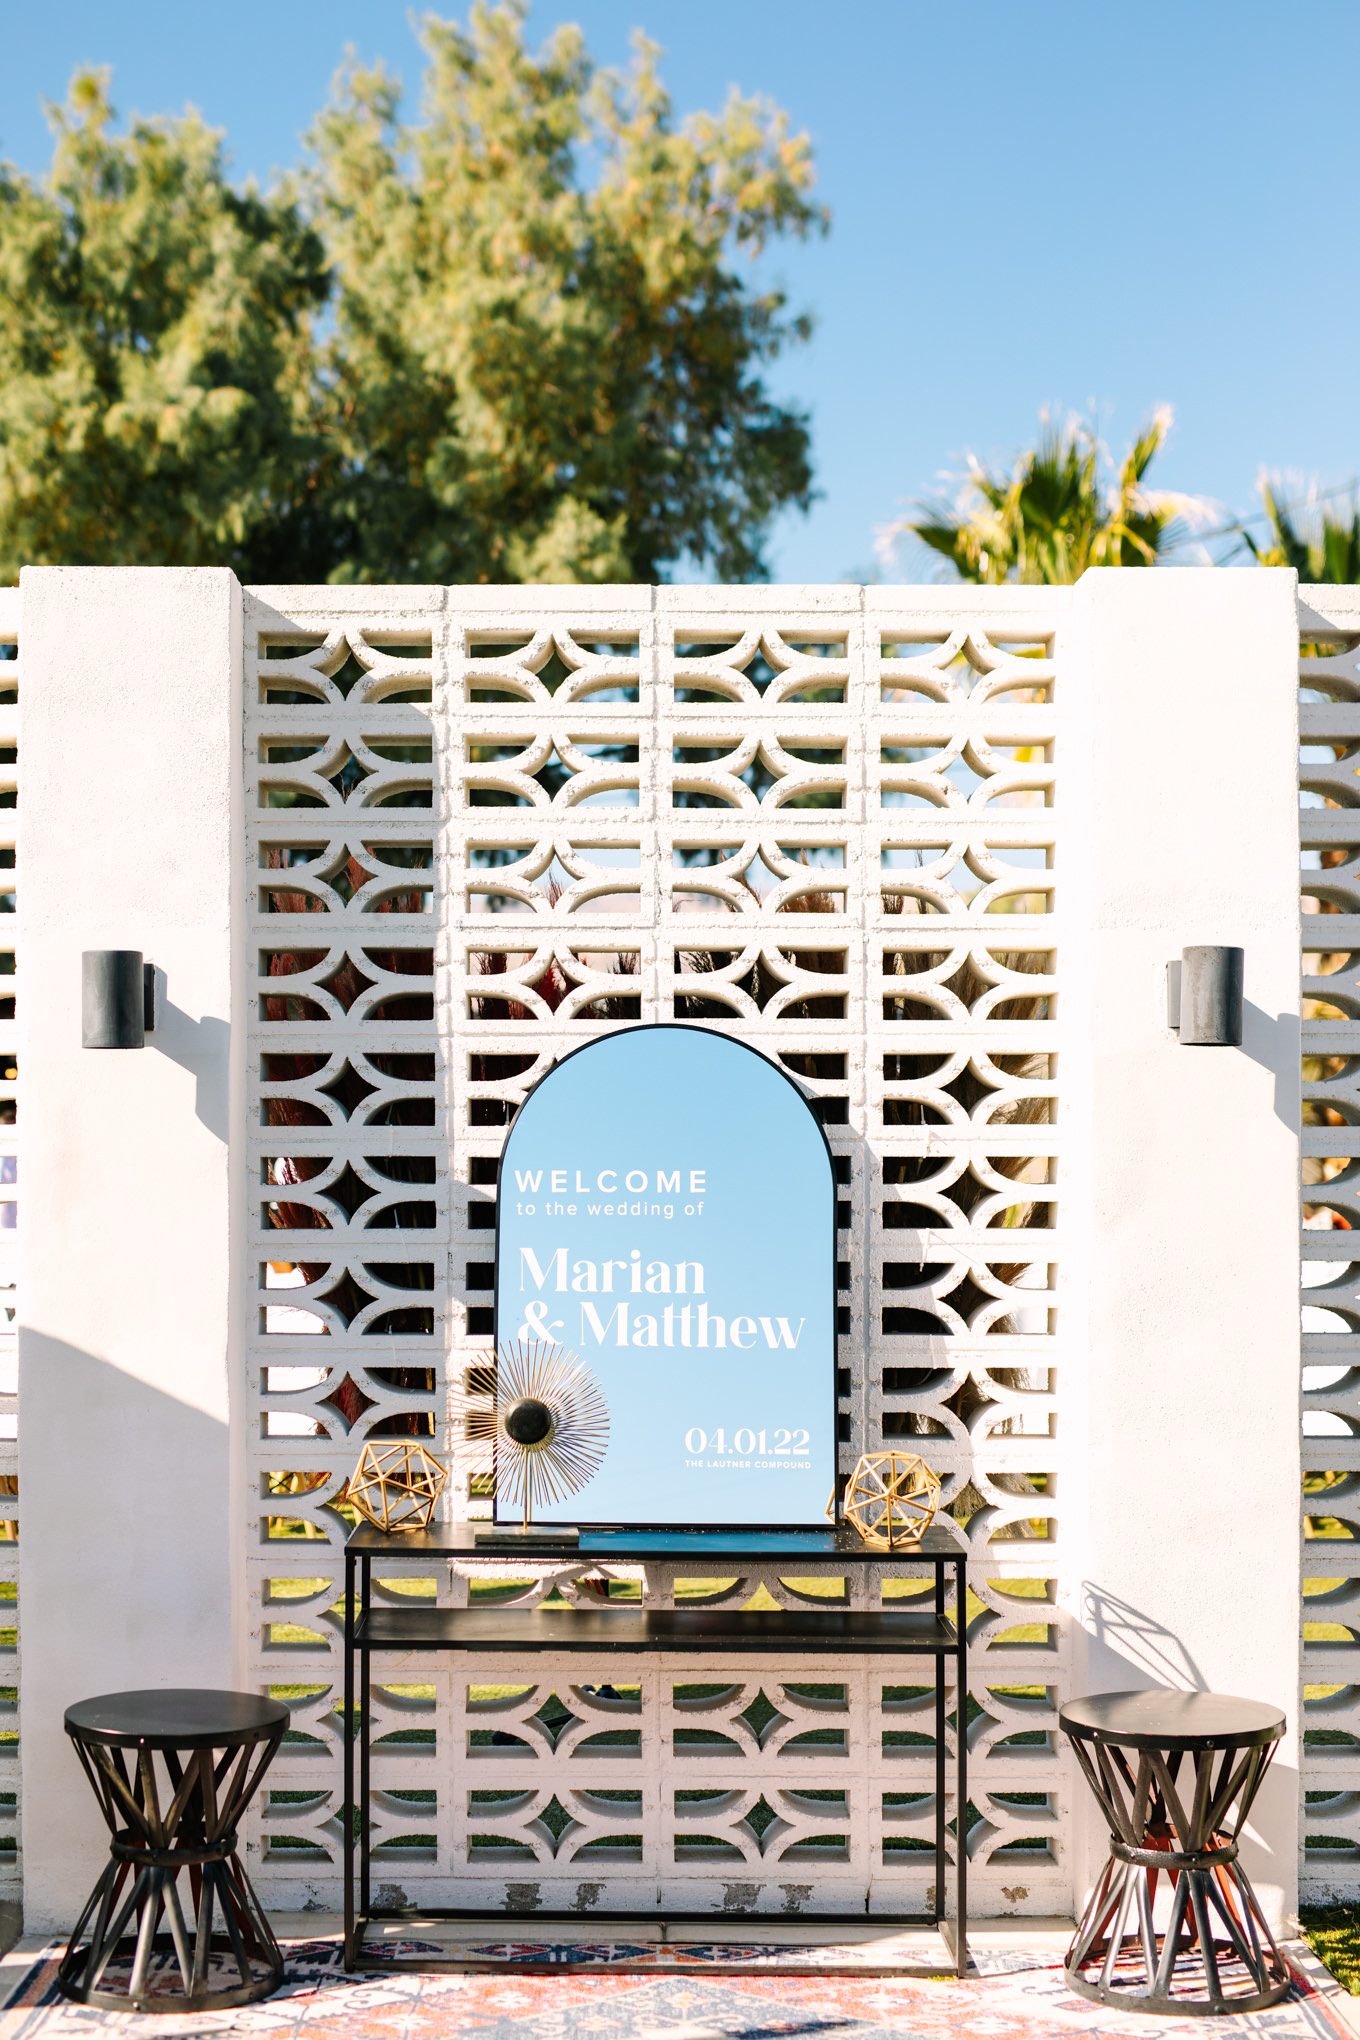 Mirror wedding welcome sign on white breezeblocks | Pink and orange Lautner Compound wedding | Colorful Palm Springs wedding photography | #palmspringsphotographer #palmspringswedding #lautnercompound #southerncaliforniawedding  Source: Mary Costa Photography | Los Angeles